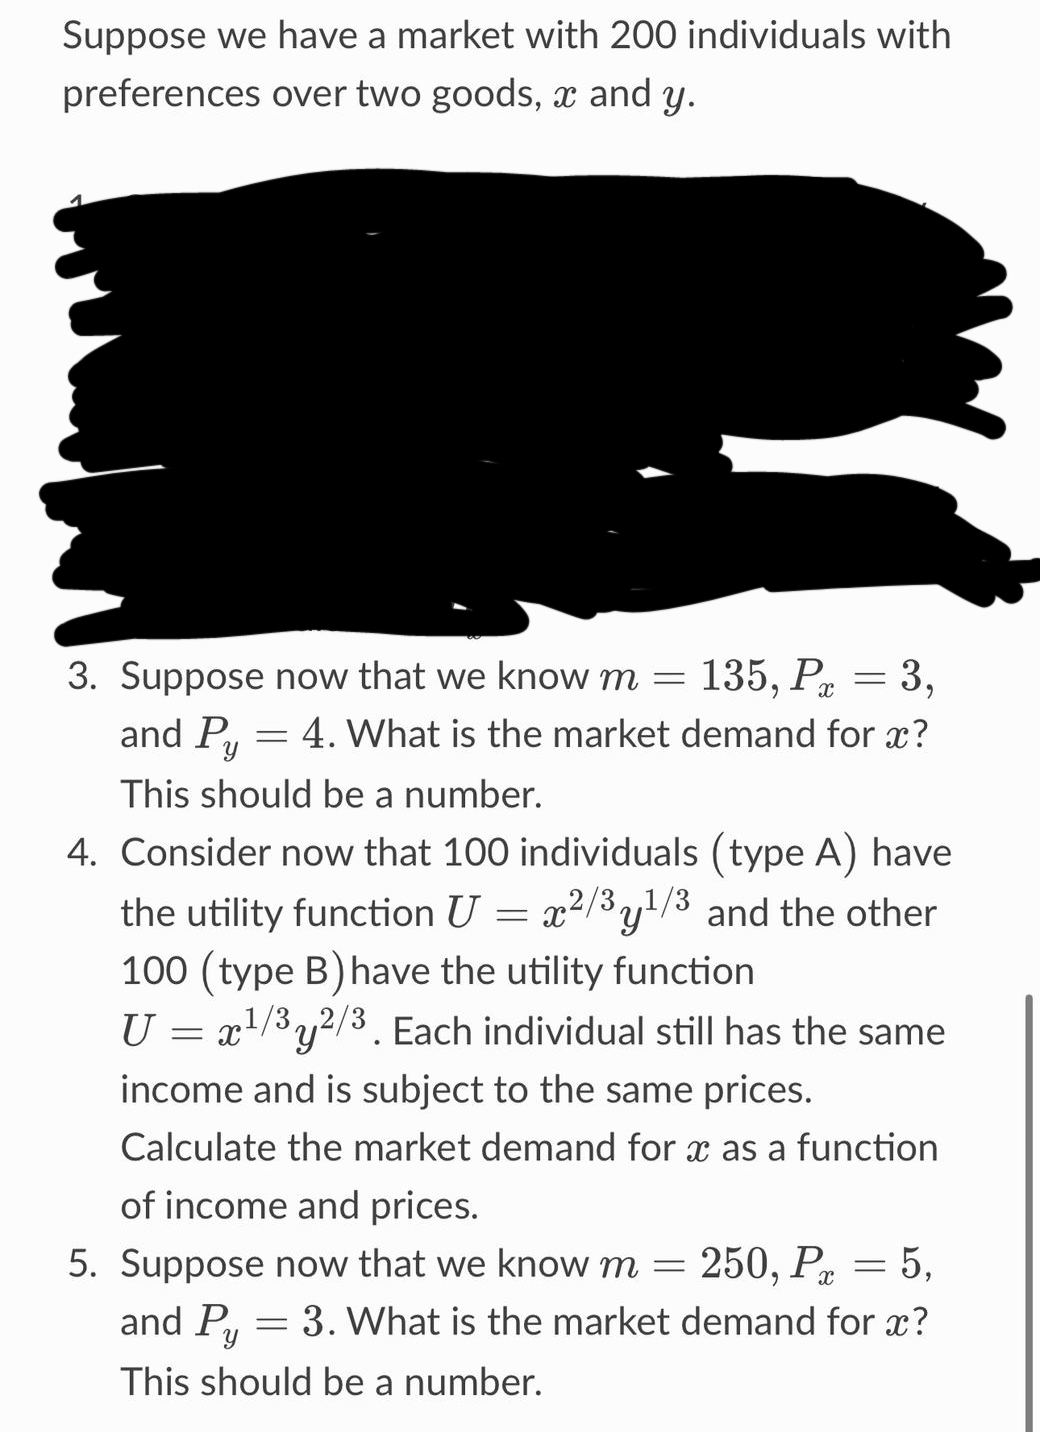 Suppose we have a market with 200 individuals with
preferences over two goods, and y.
3. Suppose now that we know m = 135, P = 3,
4. What is the market demand for x?
and Py
This should be a number.
4. Consider now that 100 individuals (type A) have
the utility function U = x²/³y¹/³ and the other
100 (type B) have the utility function
U = x¹/3y2/3. Each individual still has the same
'y
income and is subject to the same prices.
Calculate the market demand for x as a function
of income and prices.
5. Suppose now that we know m = 250, P = 5,
and Py
3. What is the market demand for x?
This should be a number.
F
=